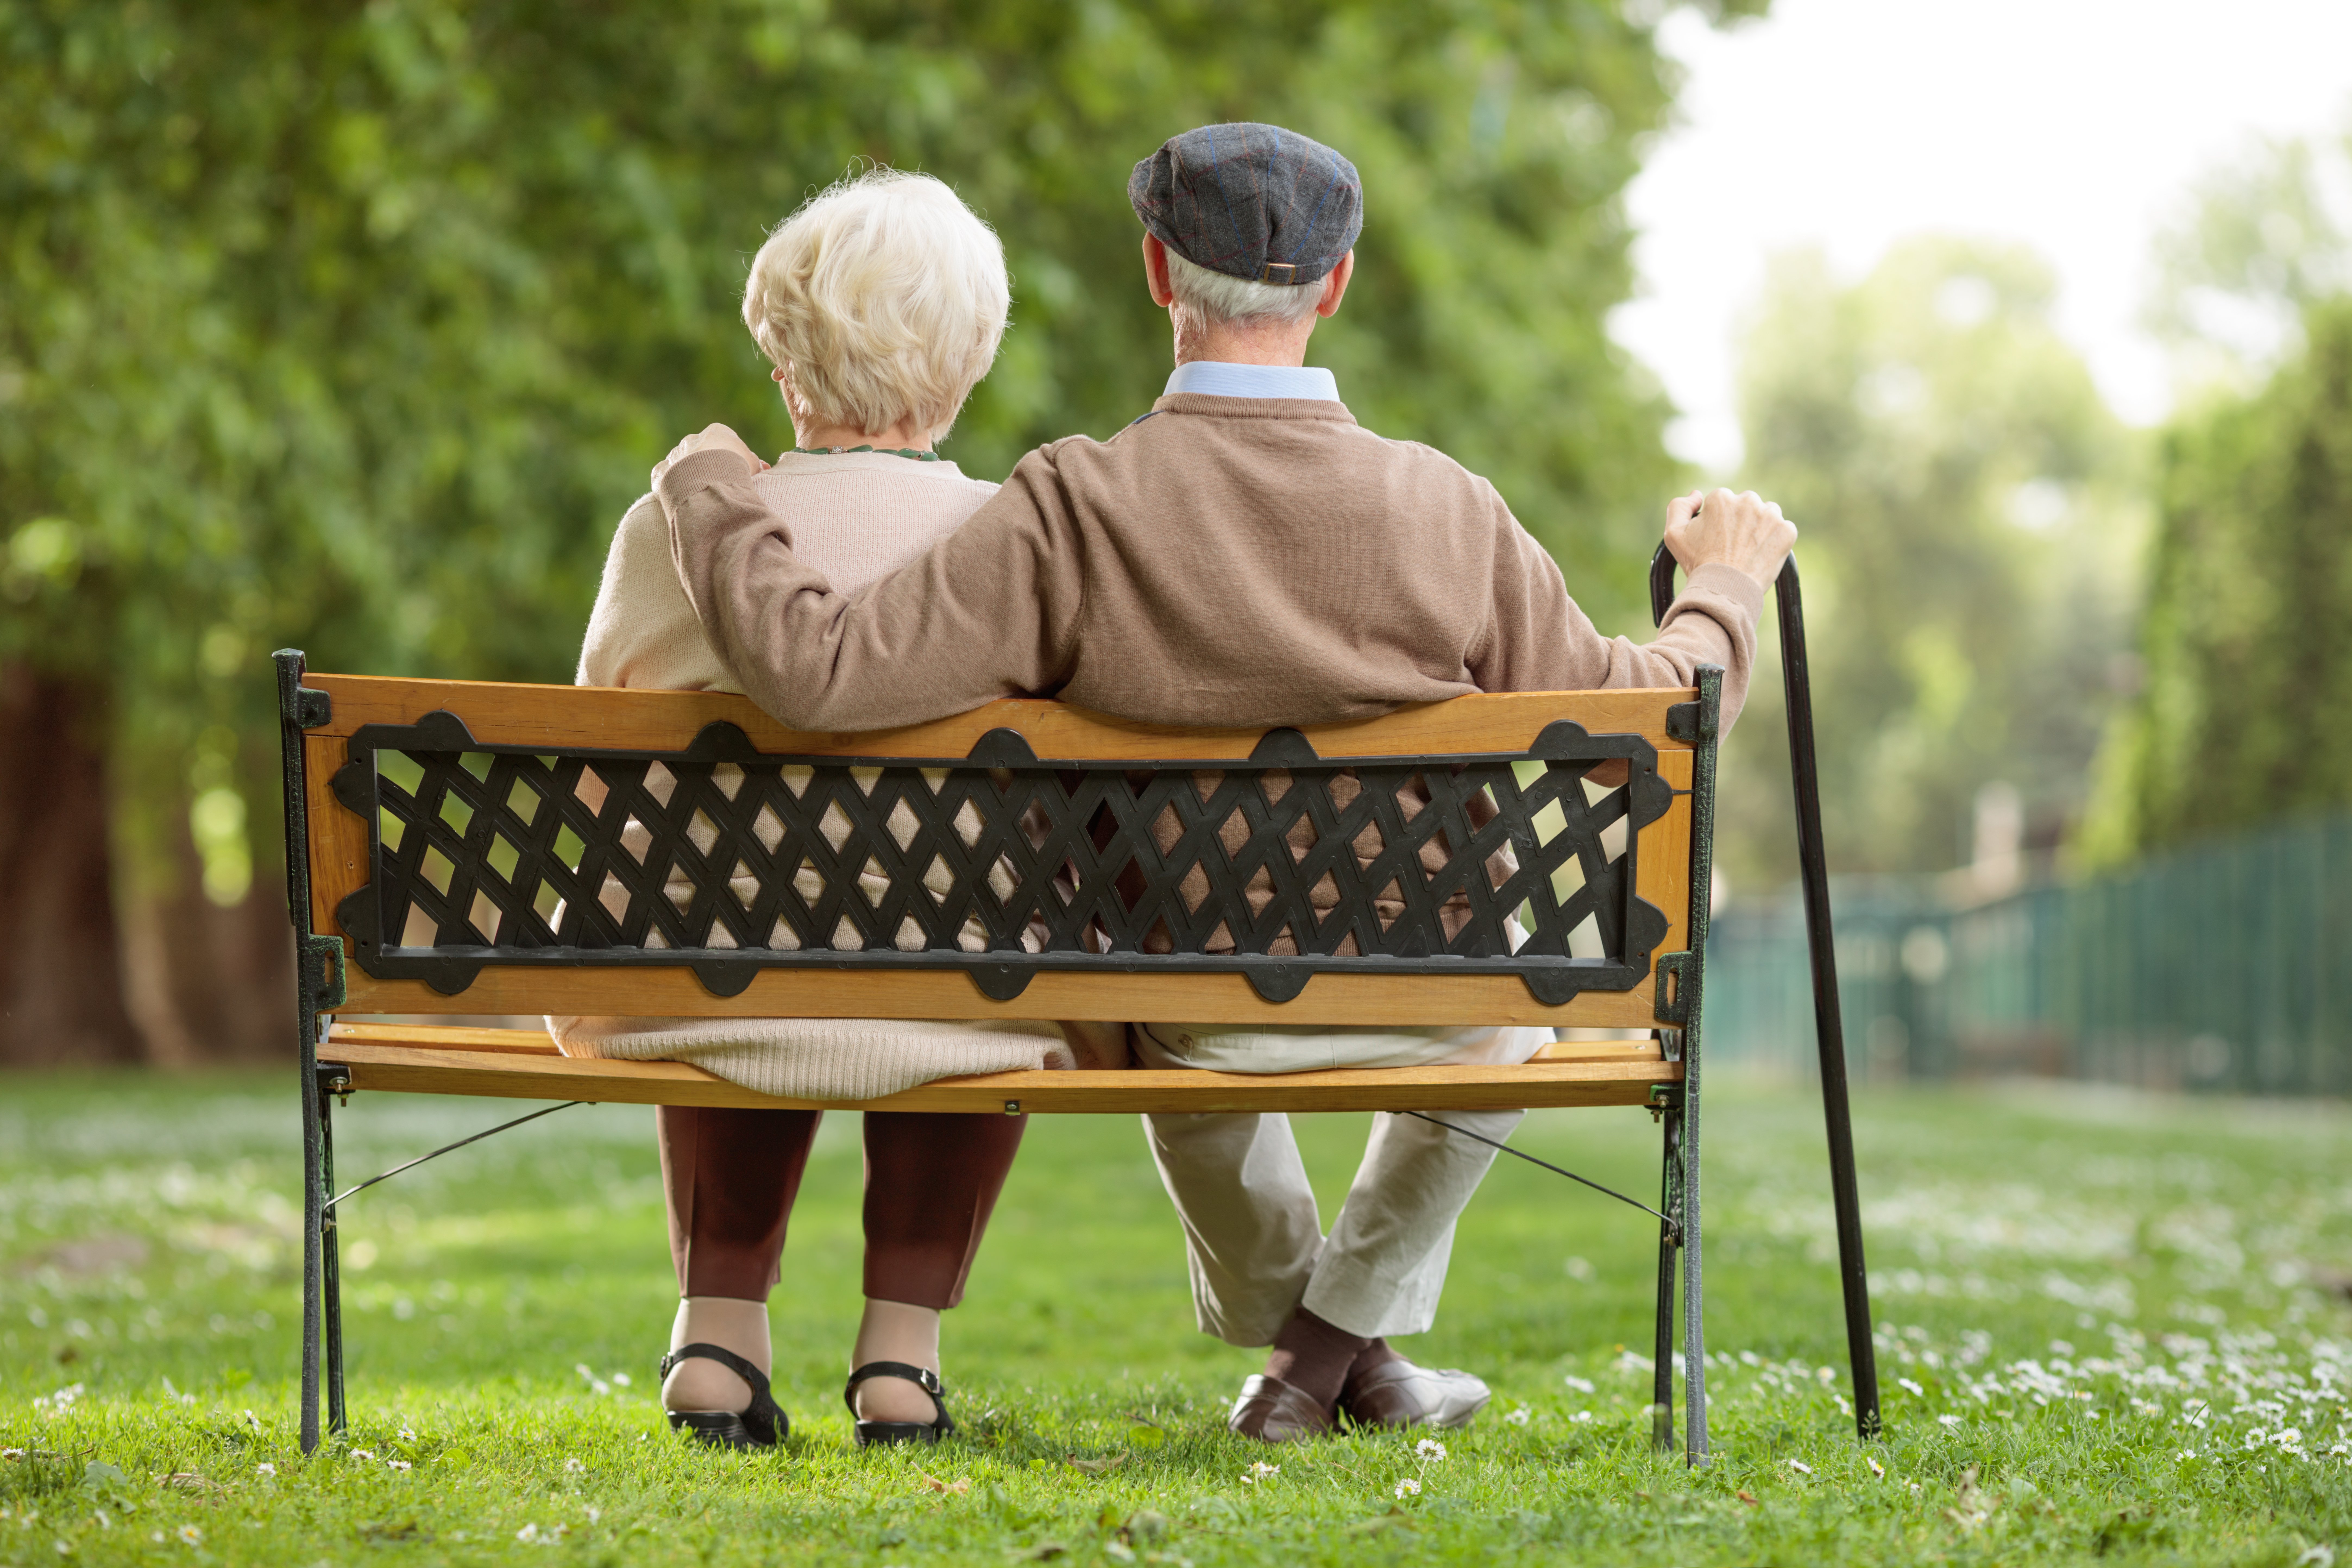 Rear view shot of a senior couple sitting on a wooden bench in the park | Photo: Shutterstock.com